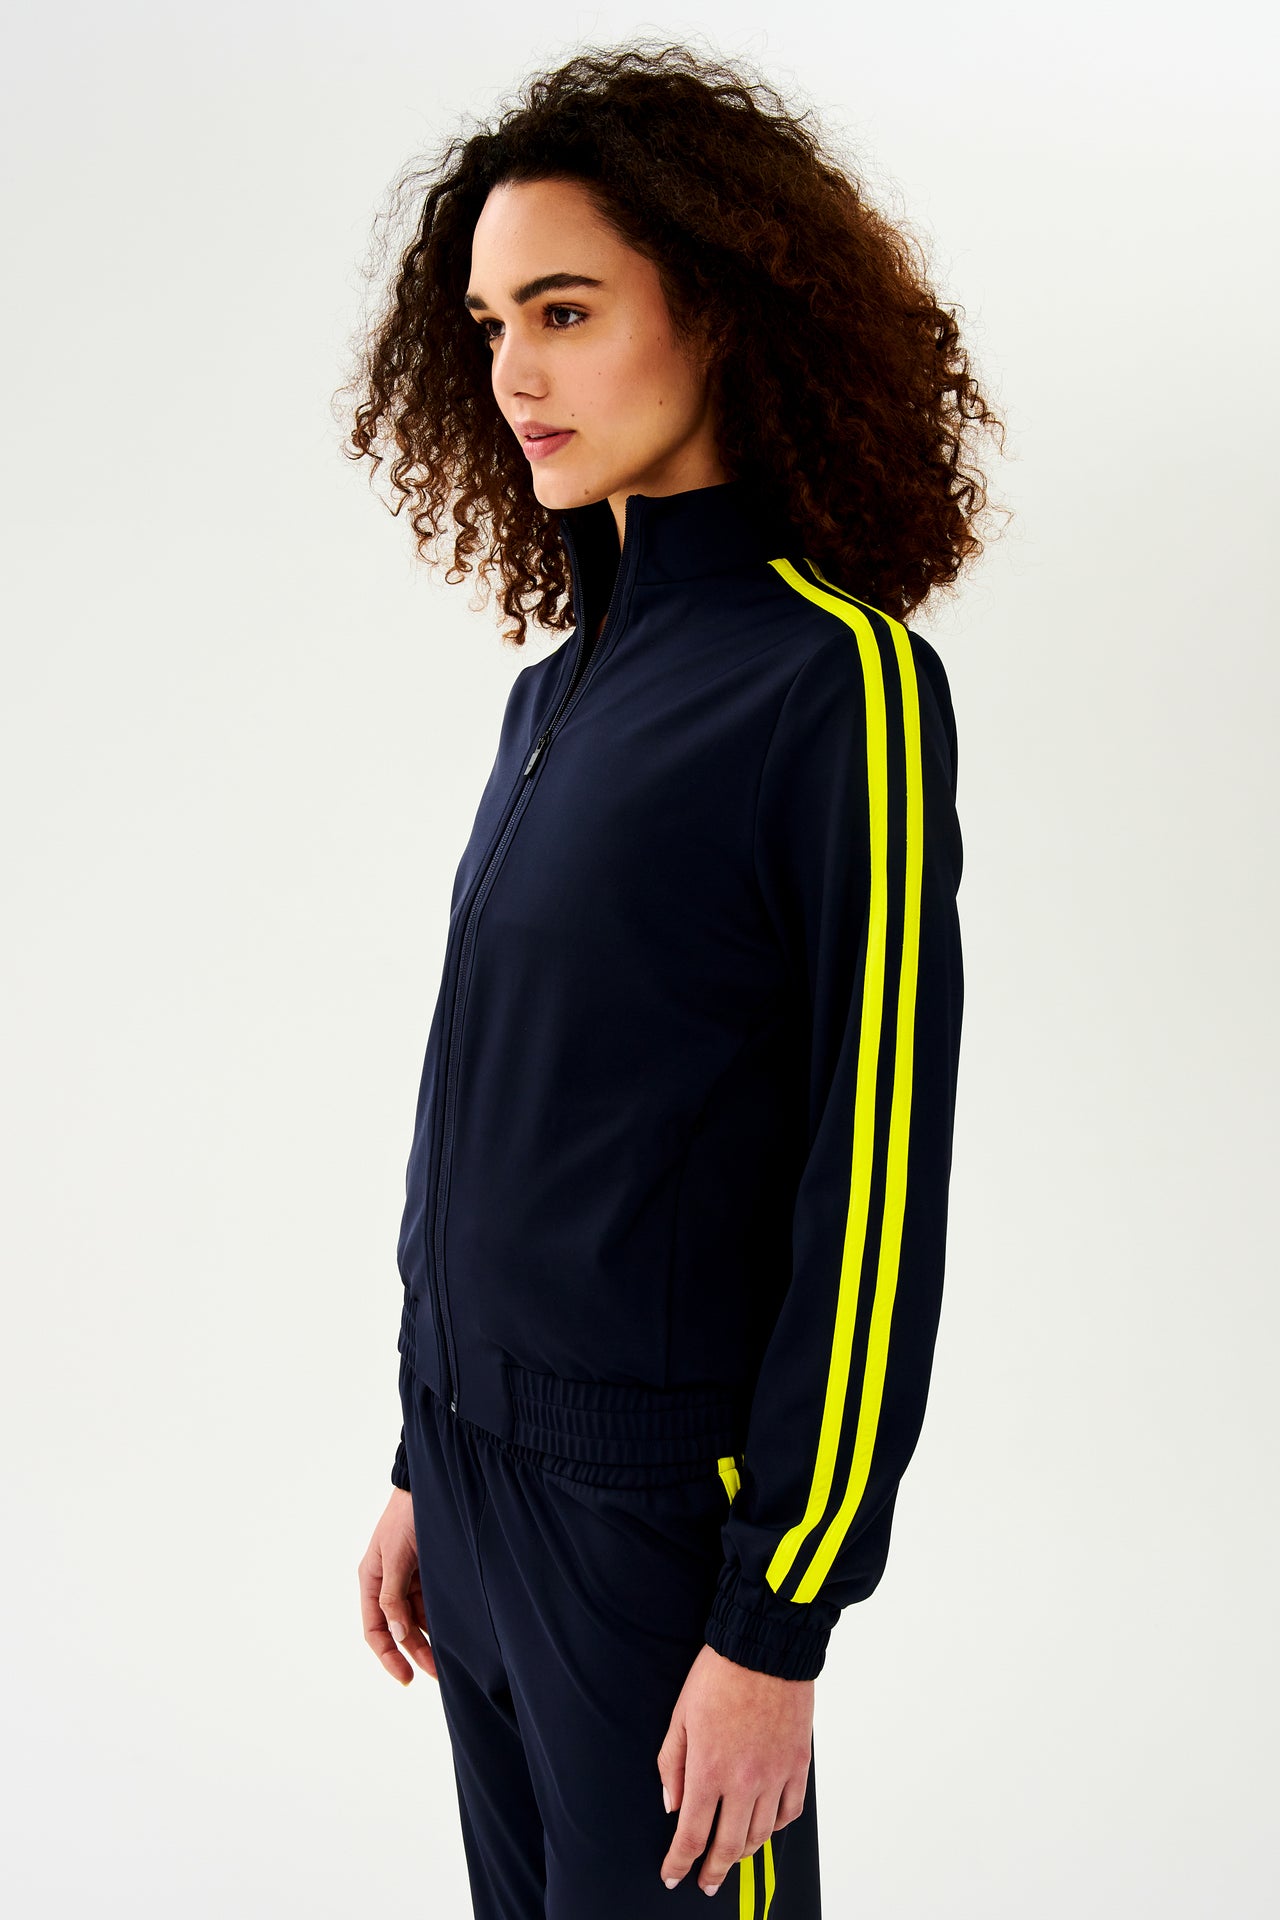 A woman wearing a luxurious SPLITS59 Fox Techflex Jacket in Indigo/Chartreuse with warming up.